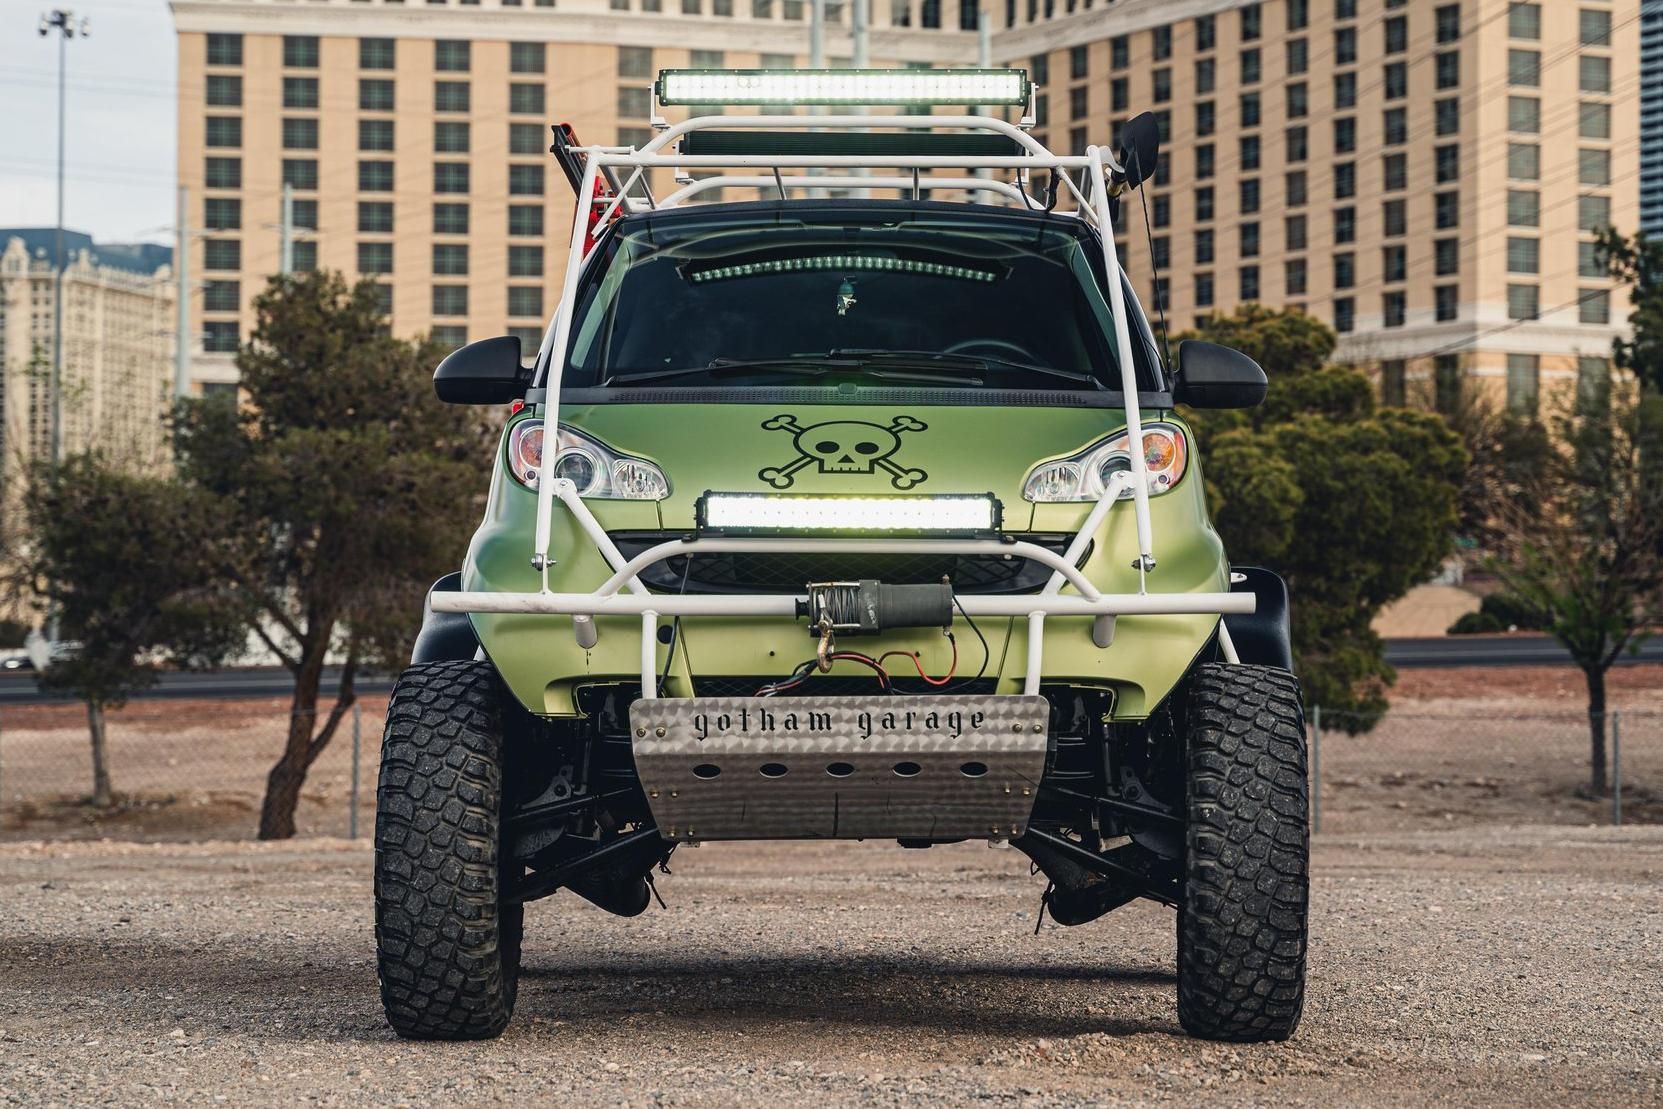 You’re Going to Want to Drive This Epic Off-Road Beast of a Smart Car